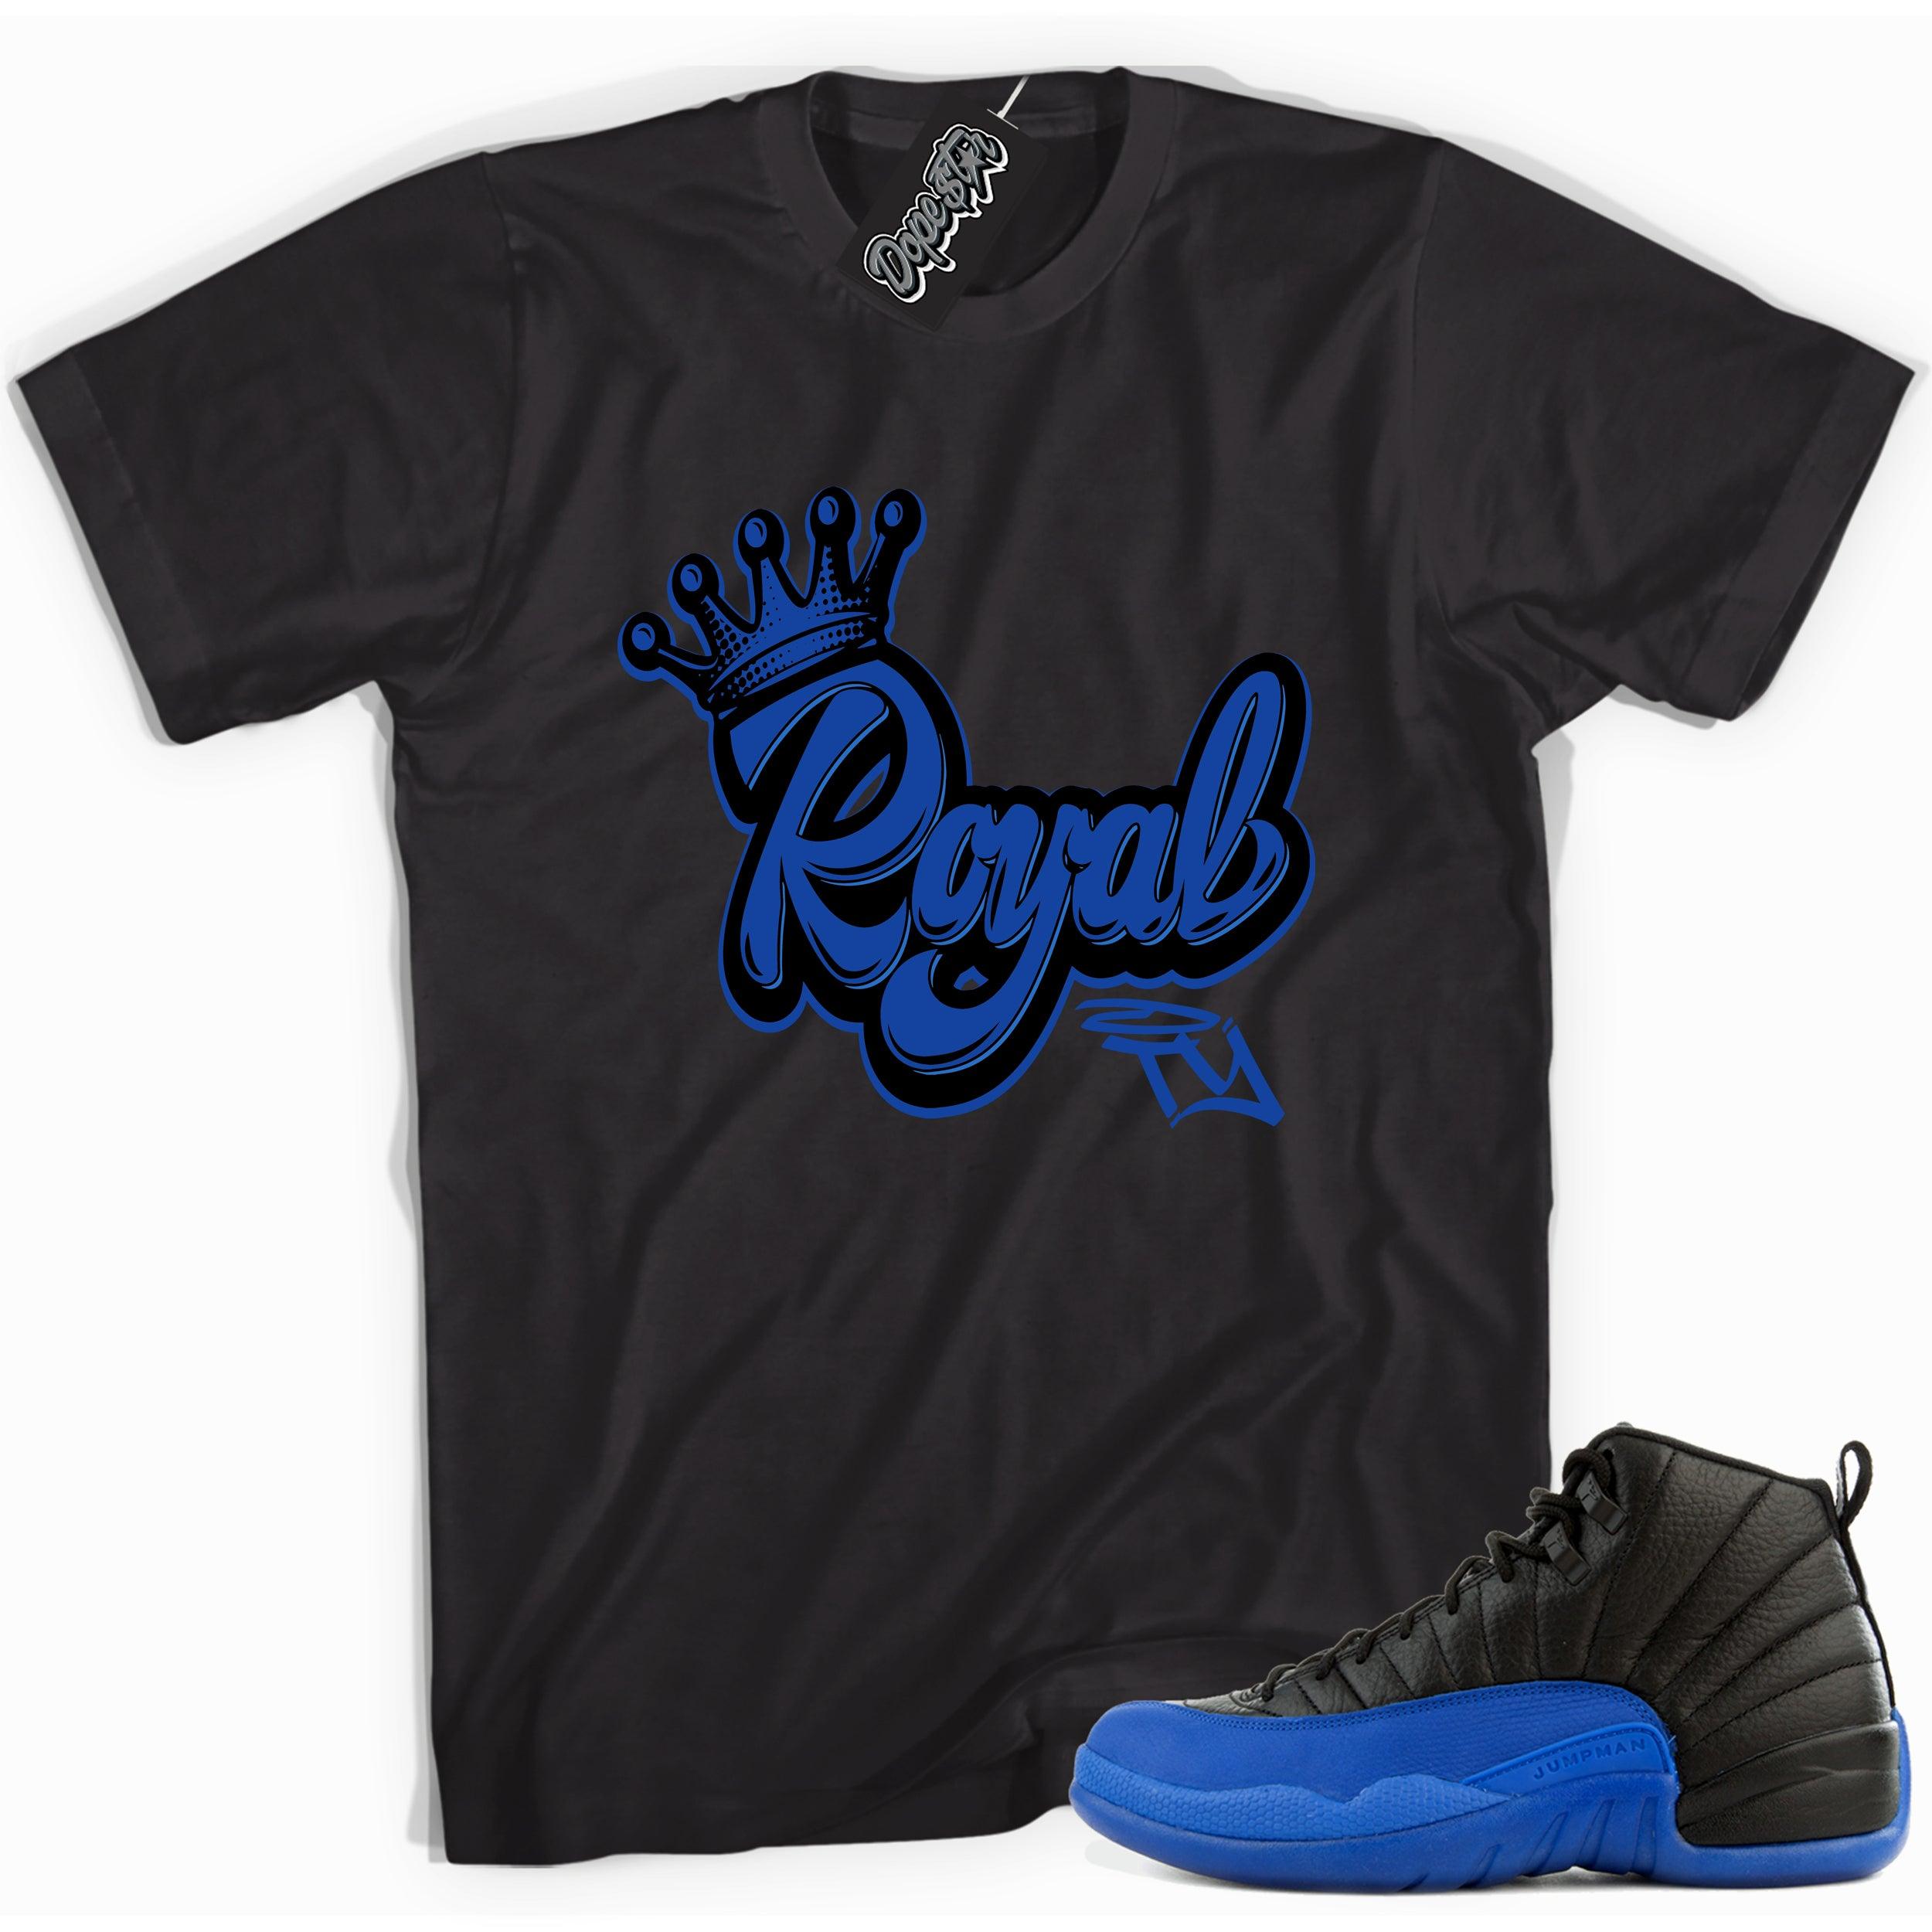 Cool black graphic tee with 'royalty' print, that perfectly matches  Air Jordan 12 Retro Black Game Royal sneakers.